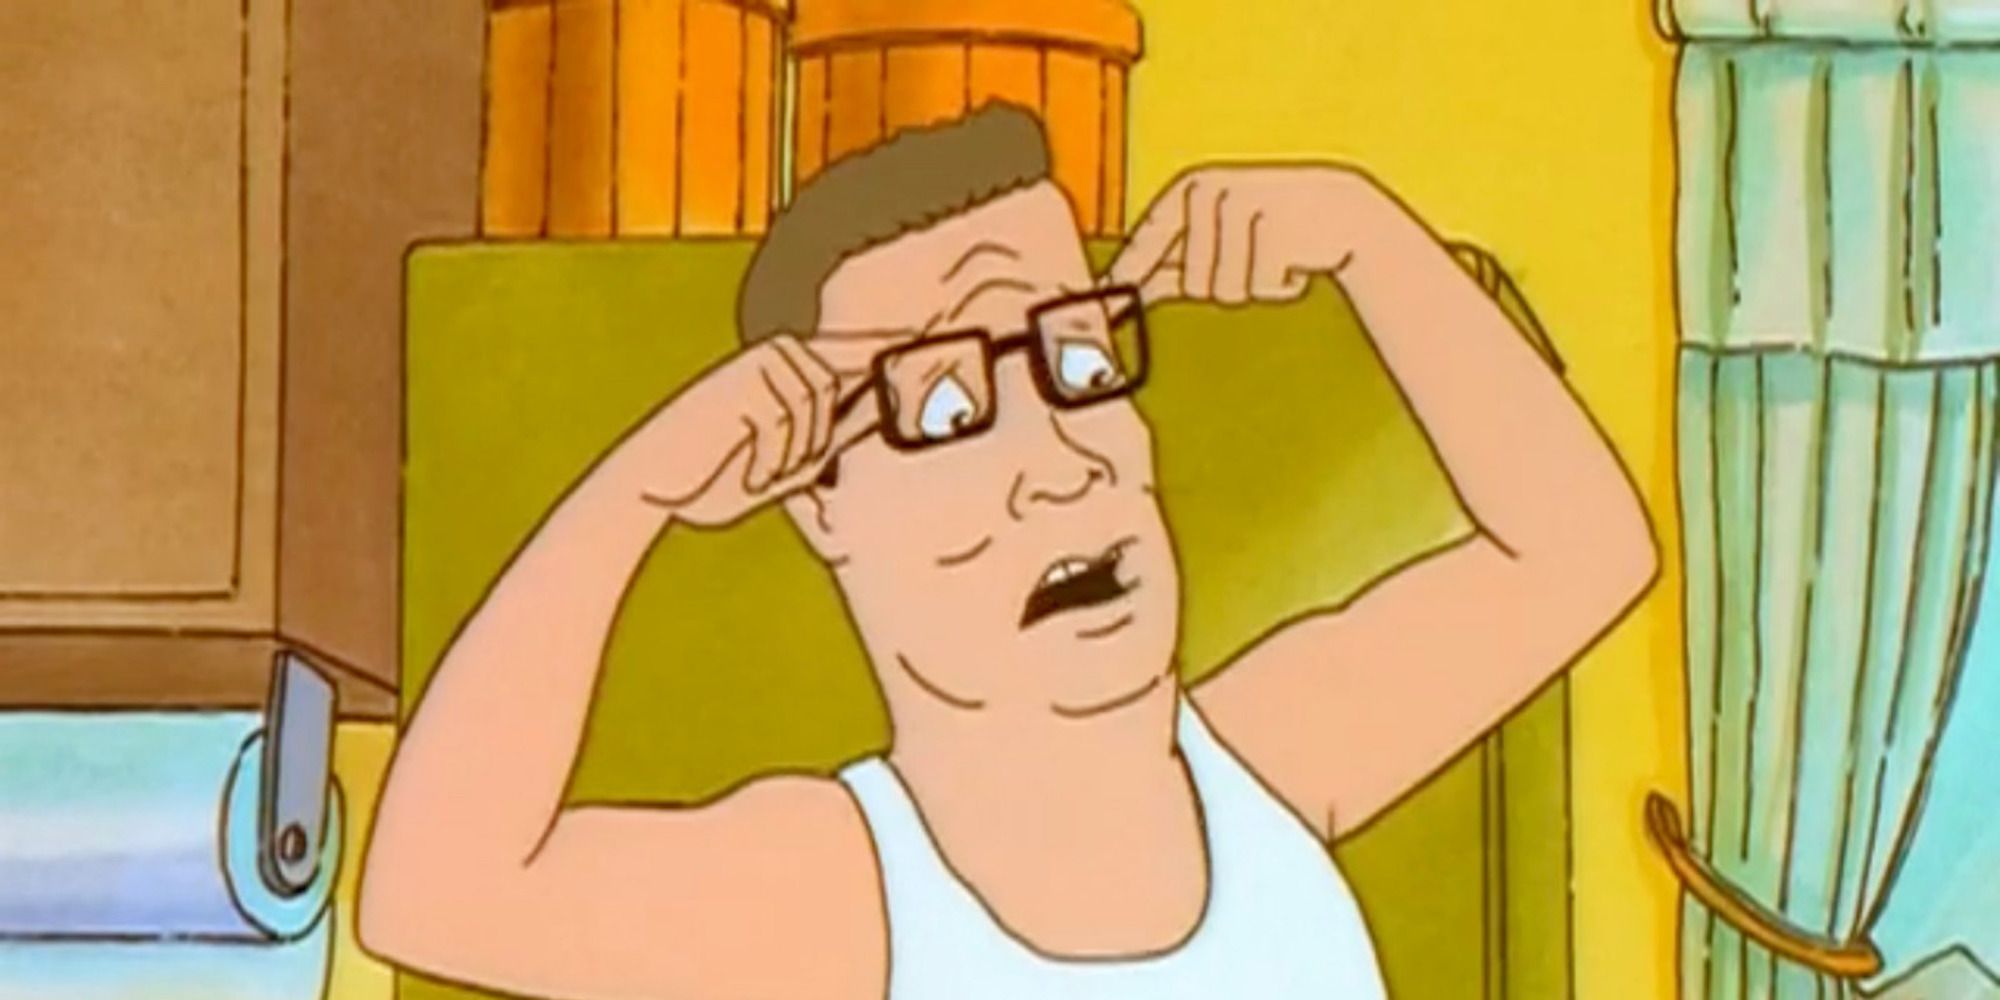 King Of The Hill The Best Hank Hill Quotes